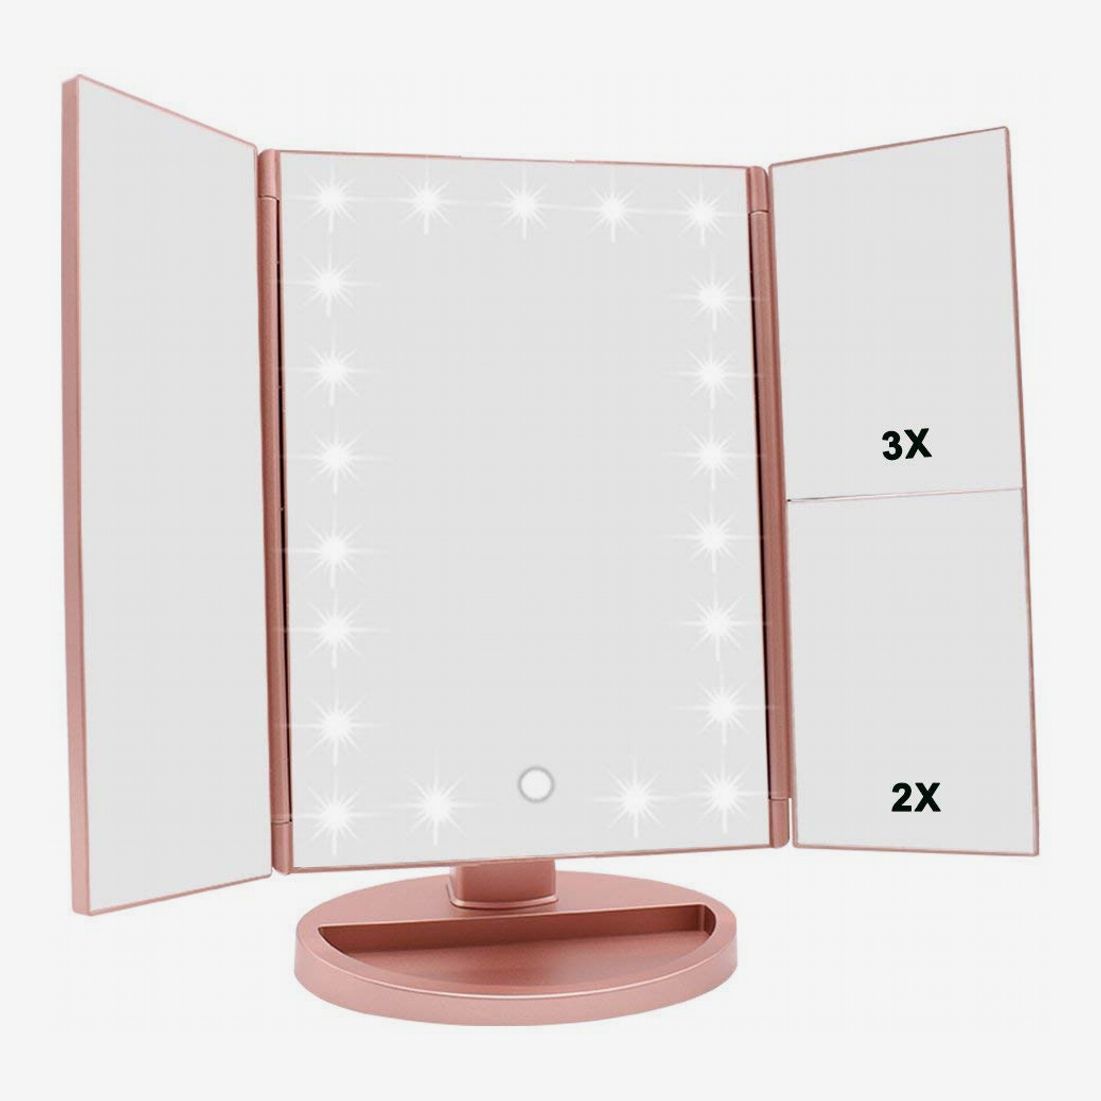 14 Best Lighted Makeup Mirrors 2021, 3 Way Vanity Mirror With Lights